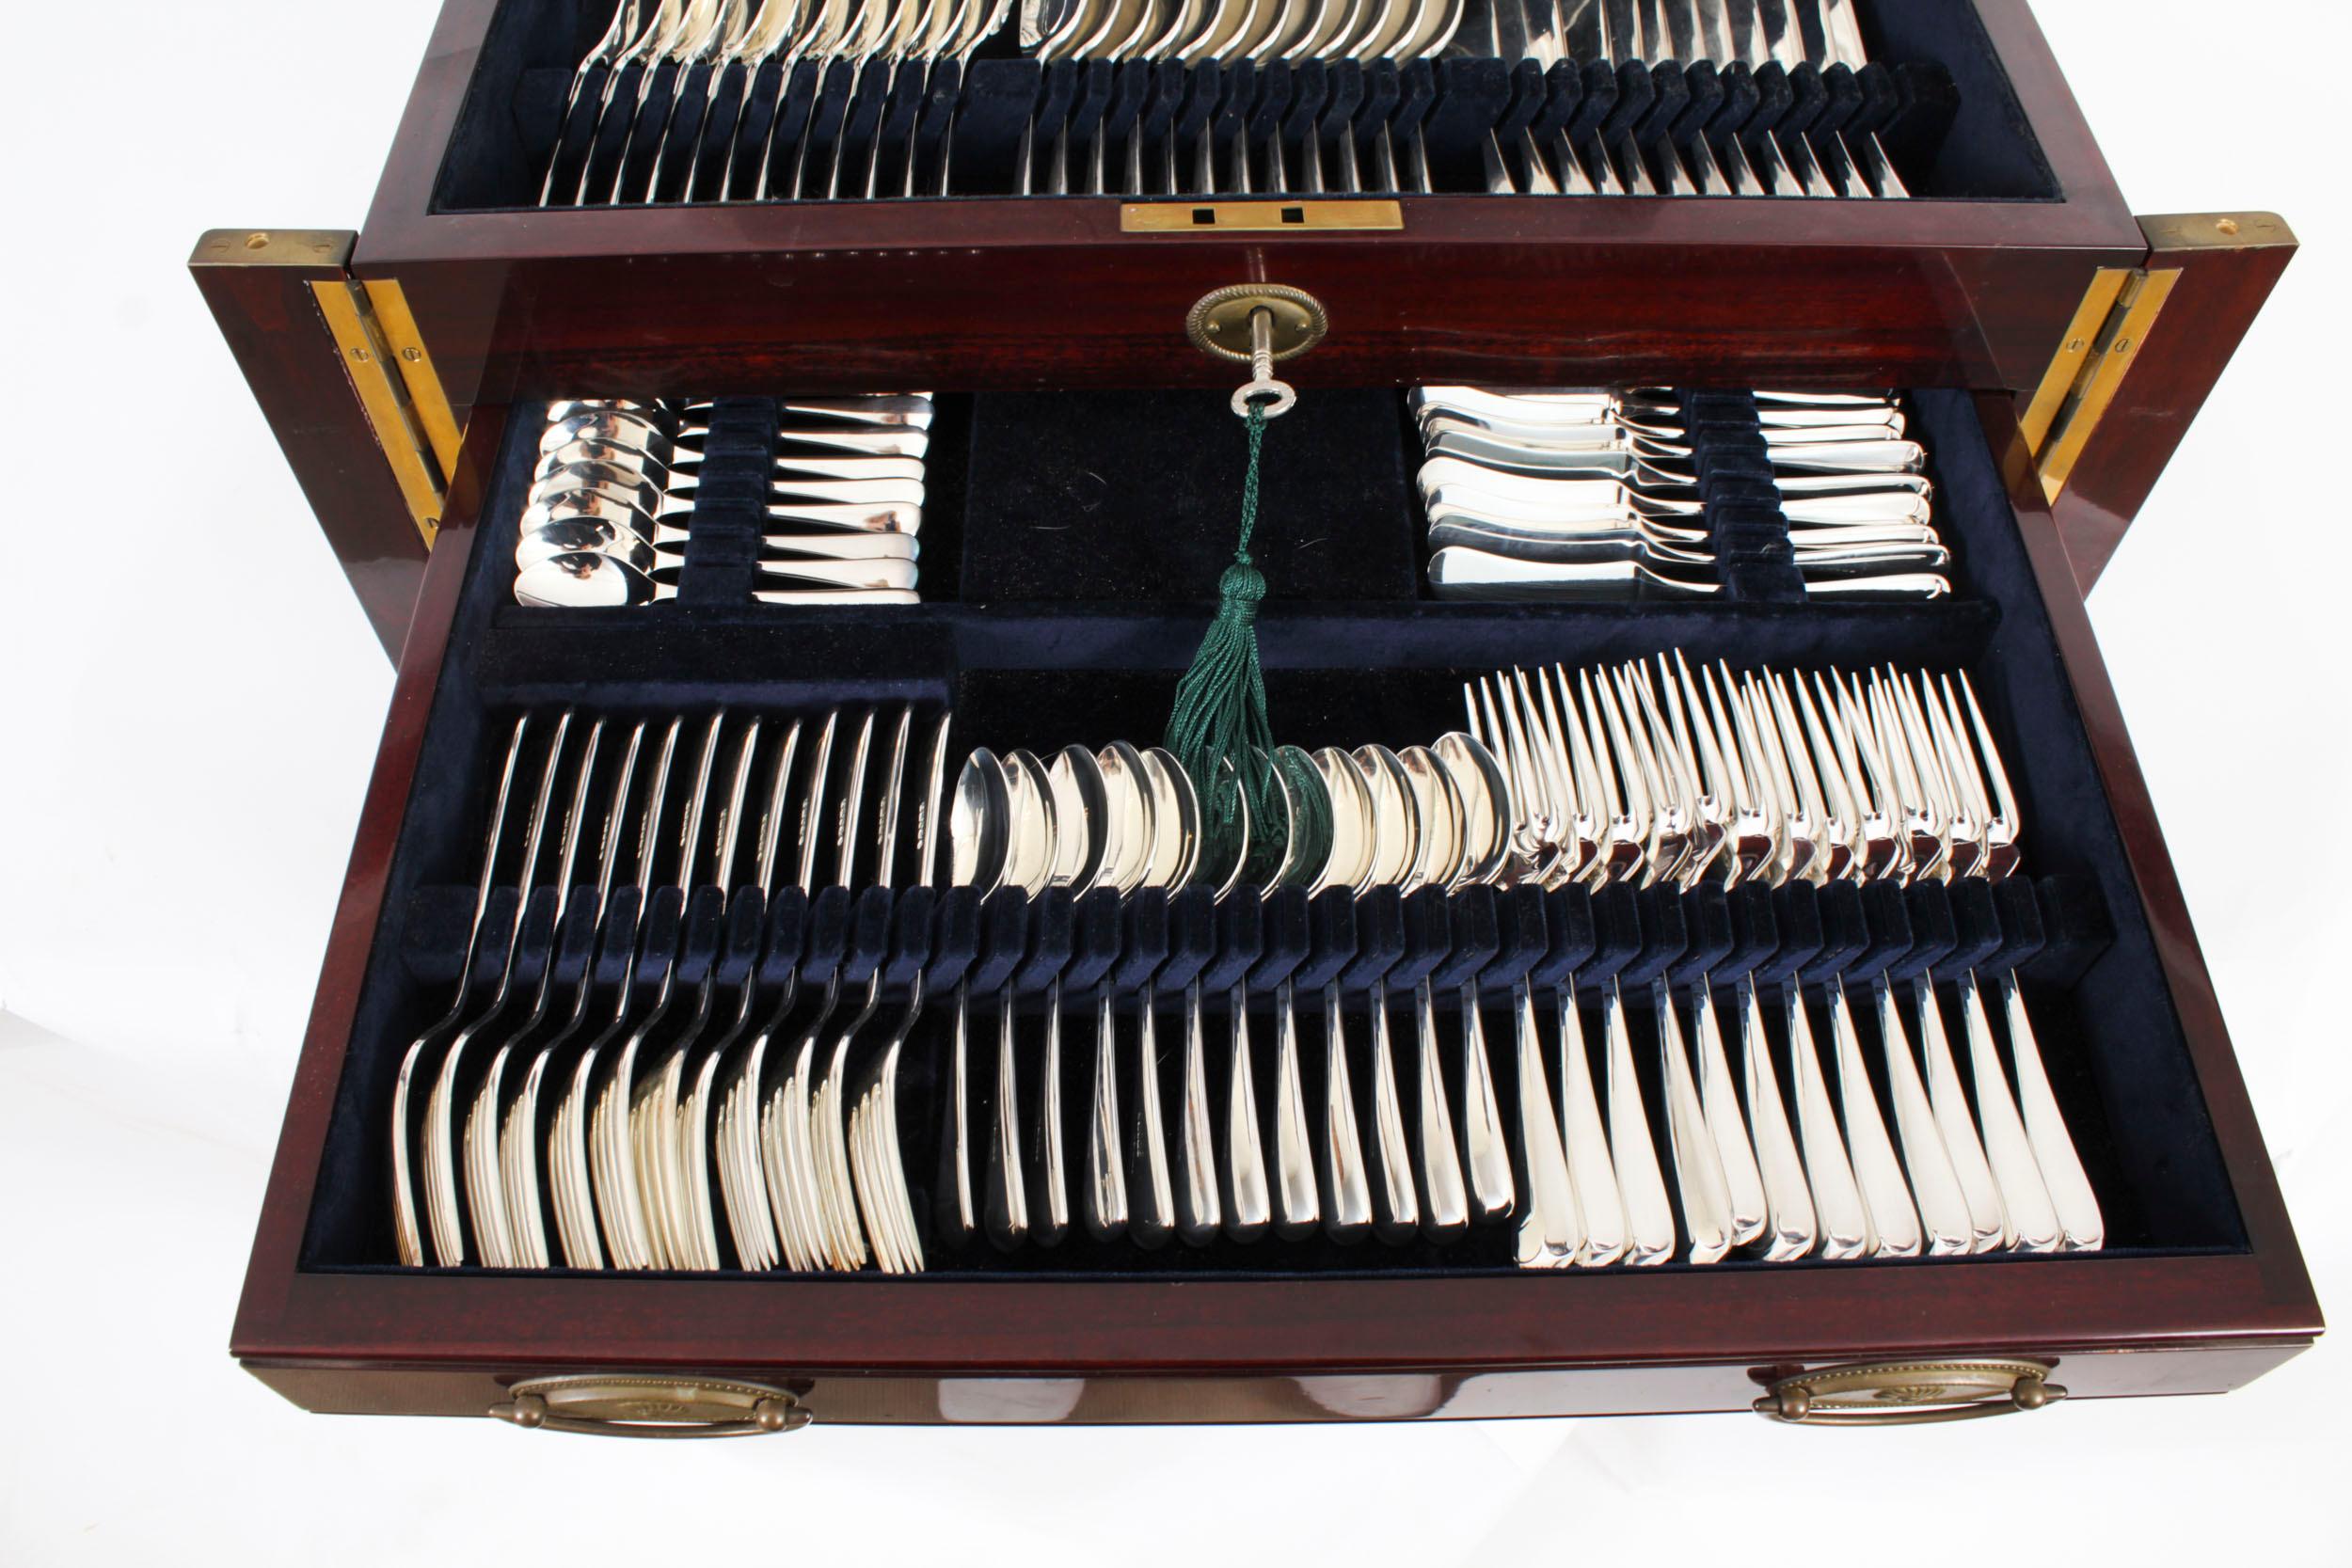 Vintage150 Piece Canteen-12 Place Sterling Silver Cutlery Set by Carrs 2004 For Sale 2